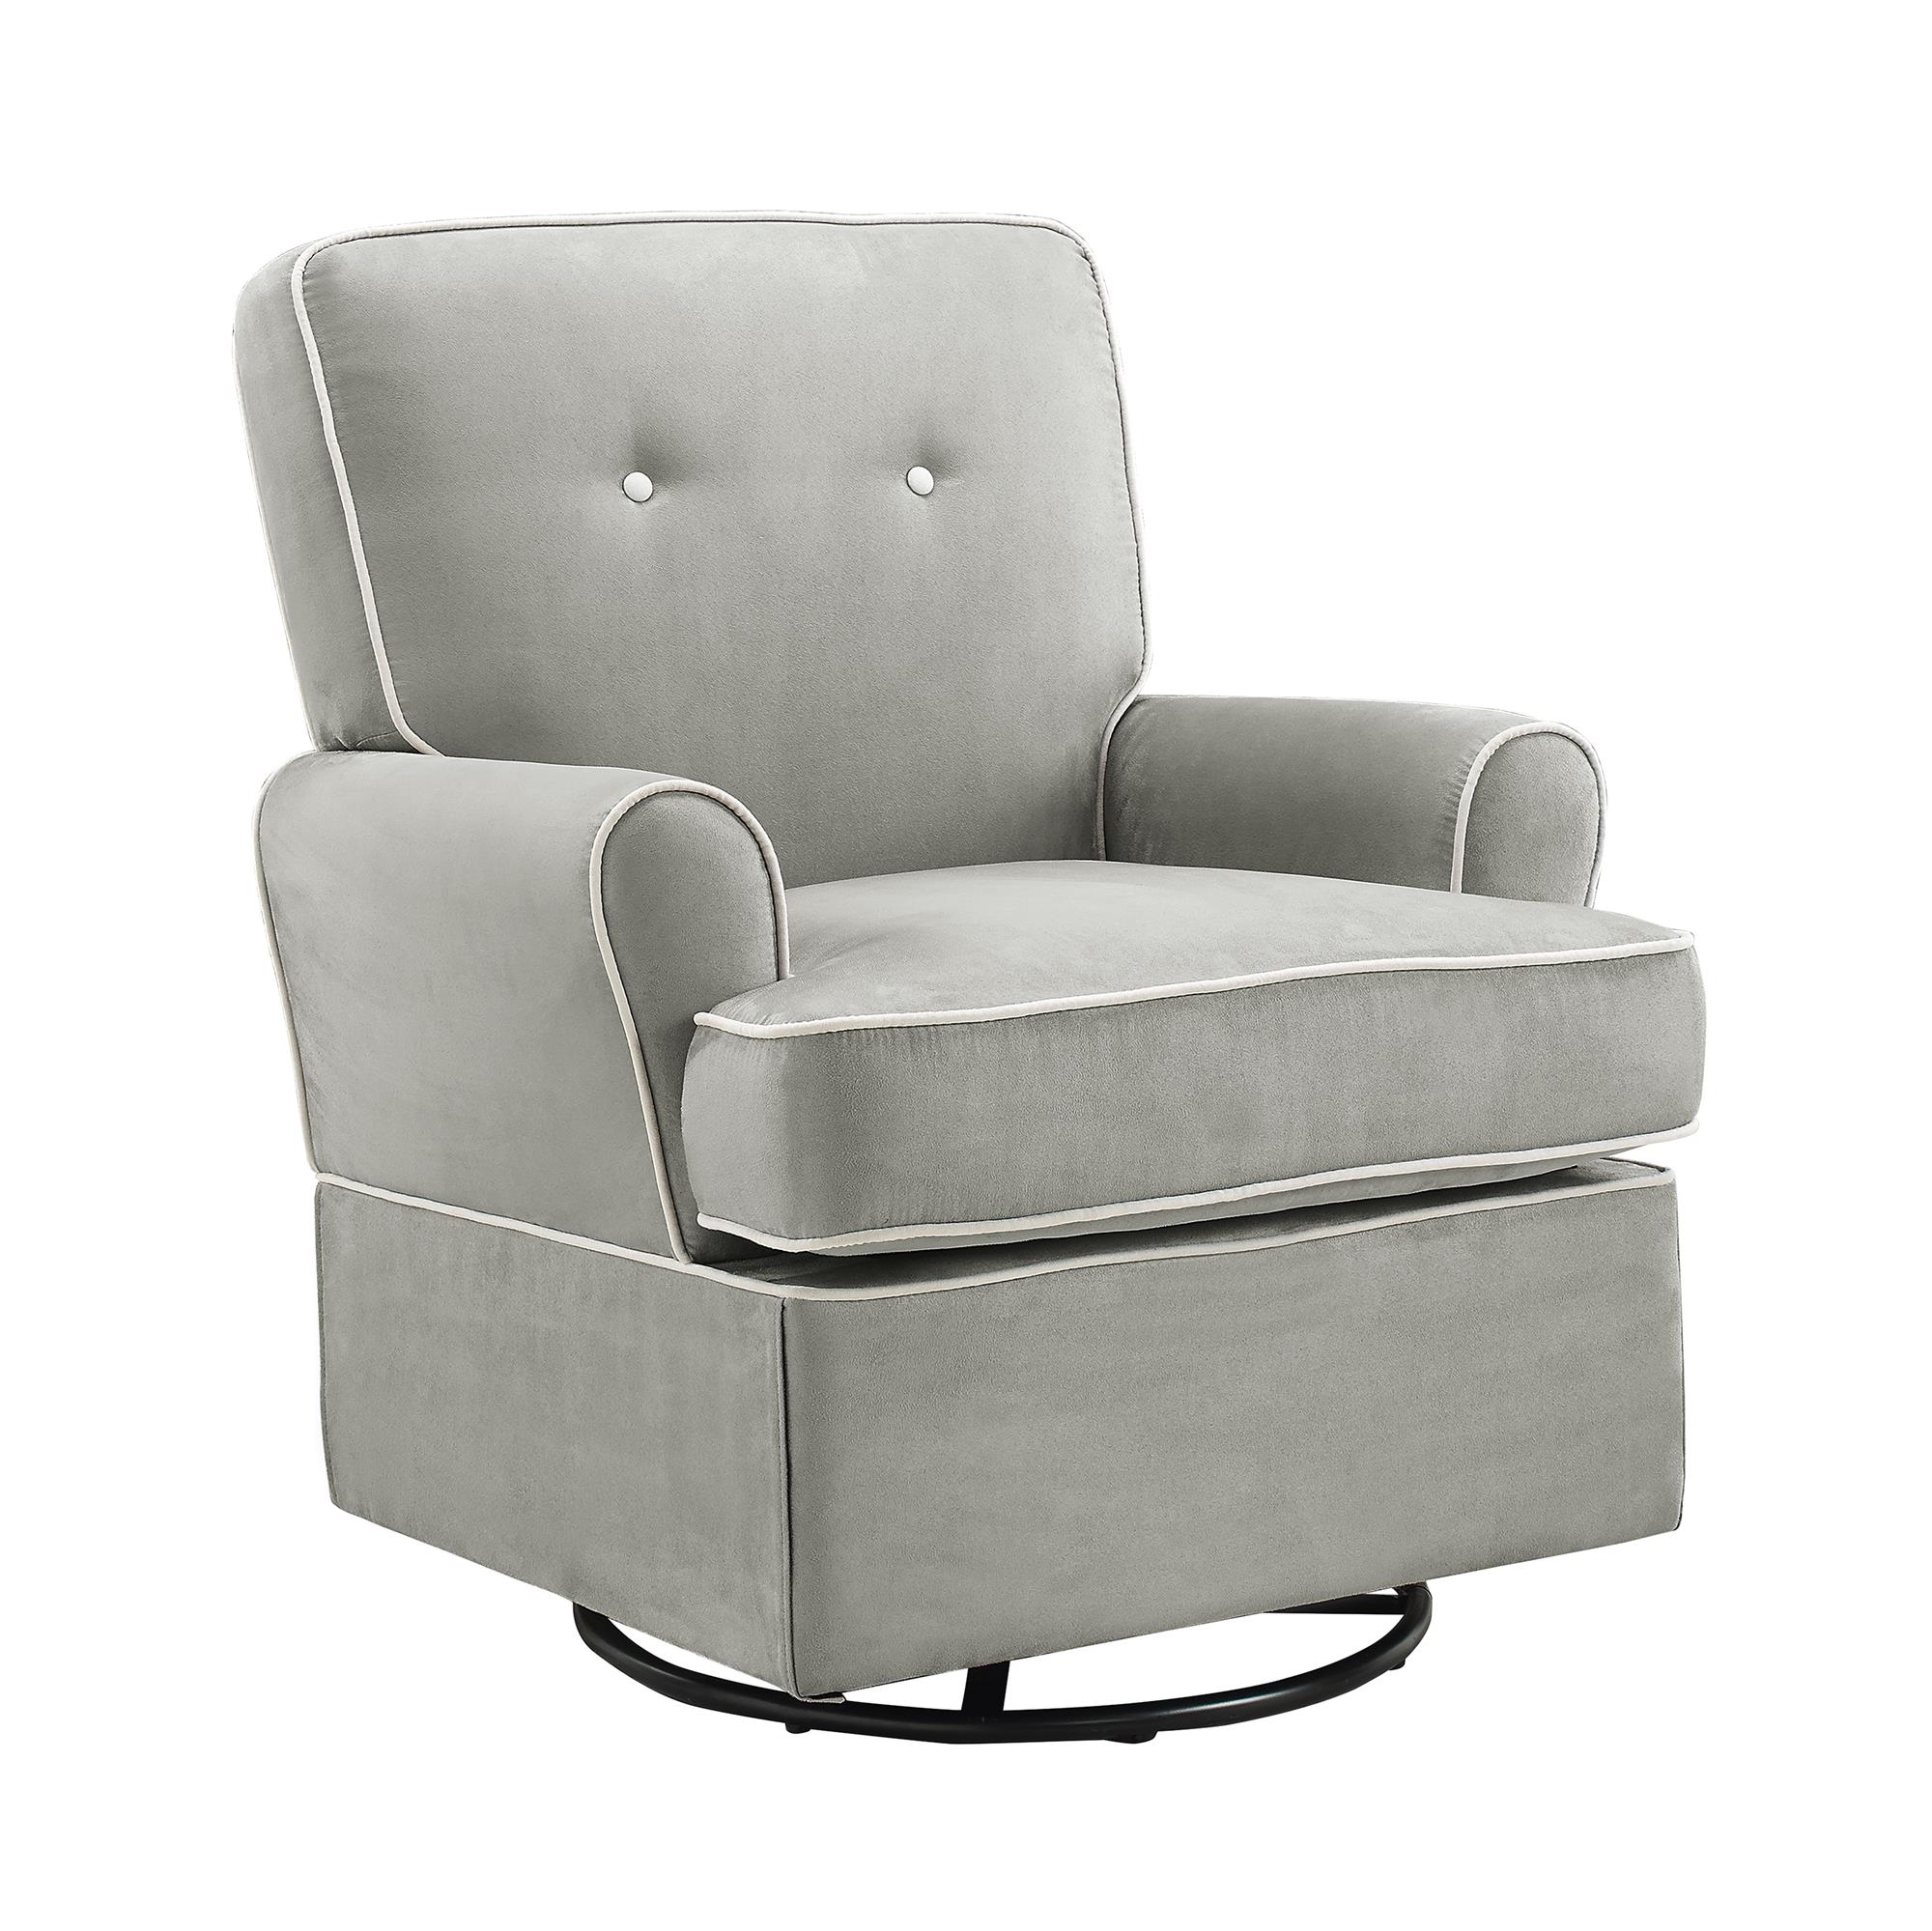 Baby Relax Tinsley Swivel Glider Gray - image 5 of 8